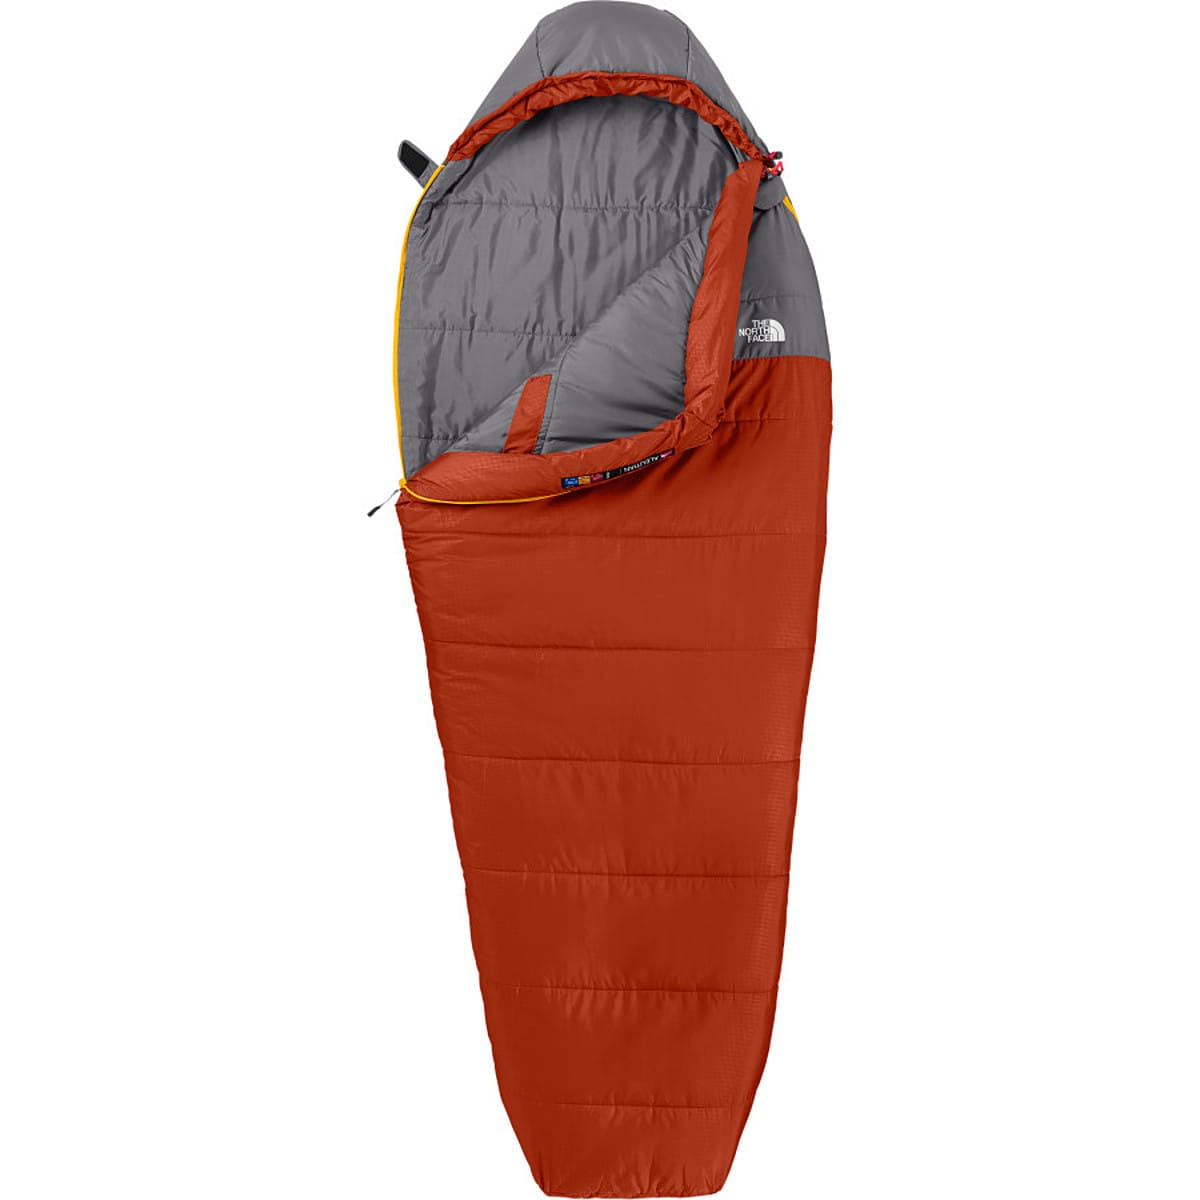 Kinderachtig Gehuurd specificeren The North Face Aleutian Sleeping Bag: 50F Synthetic - Hike & Camp